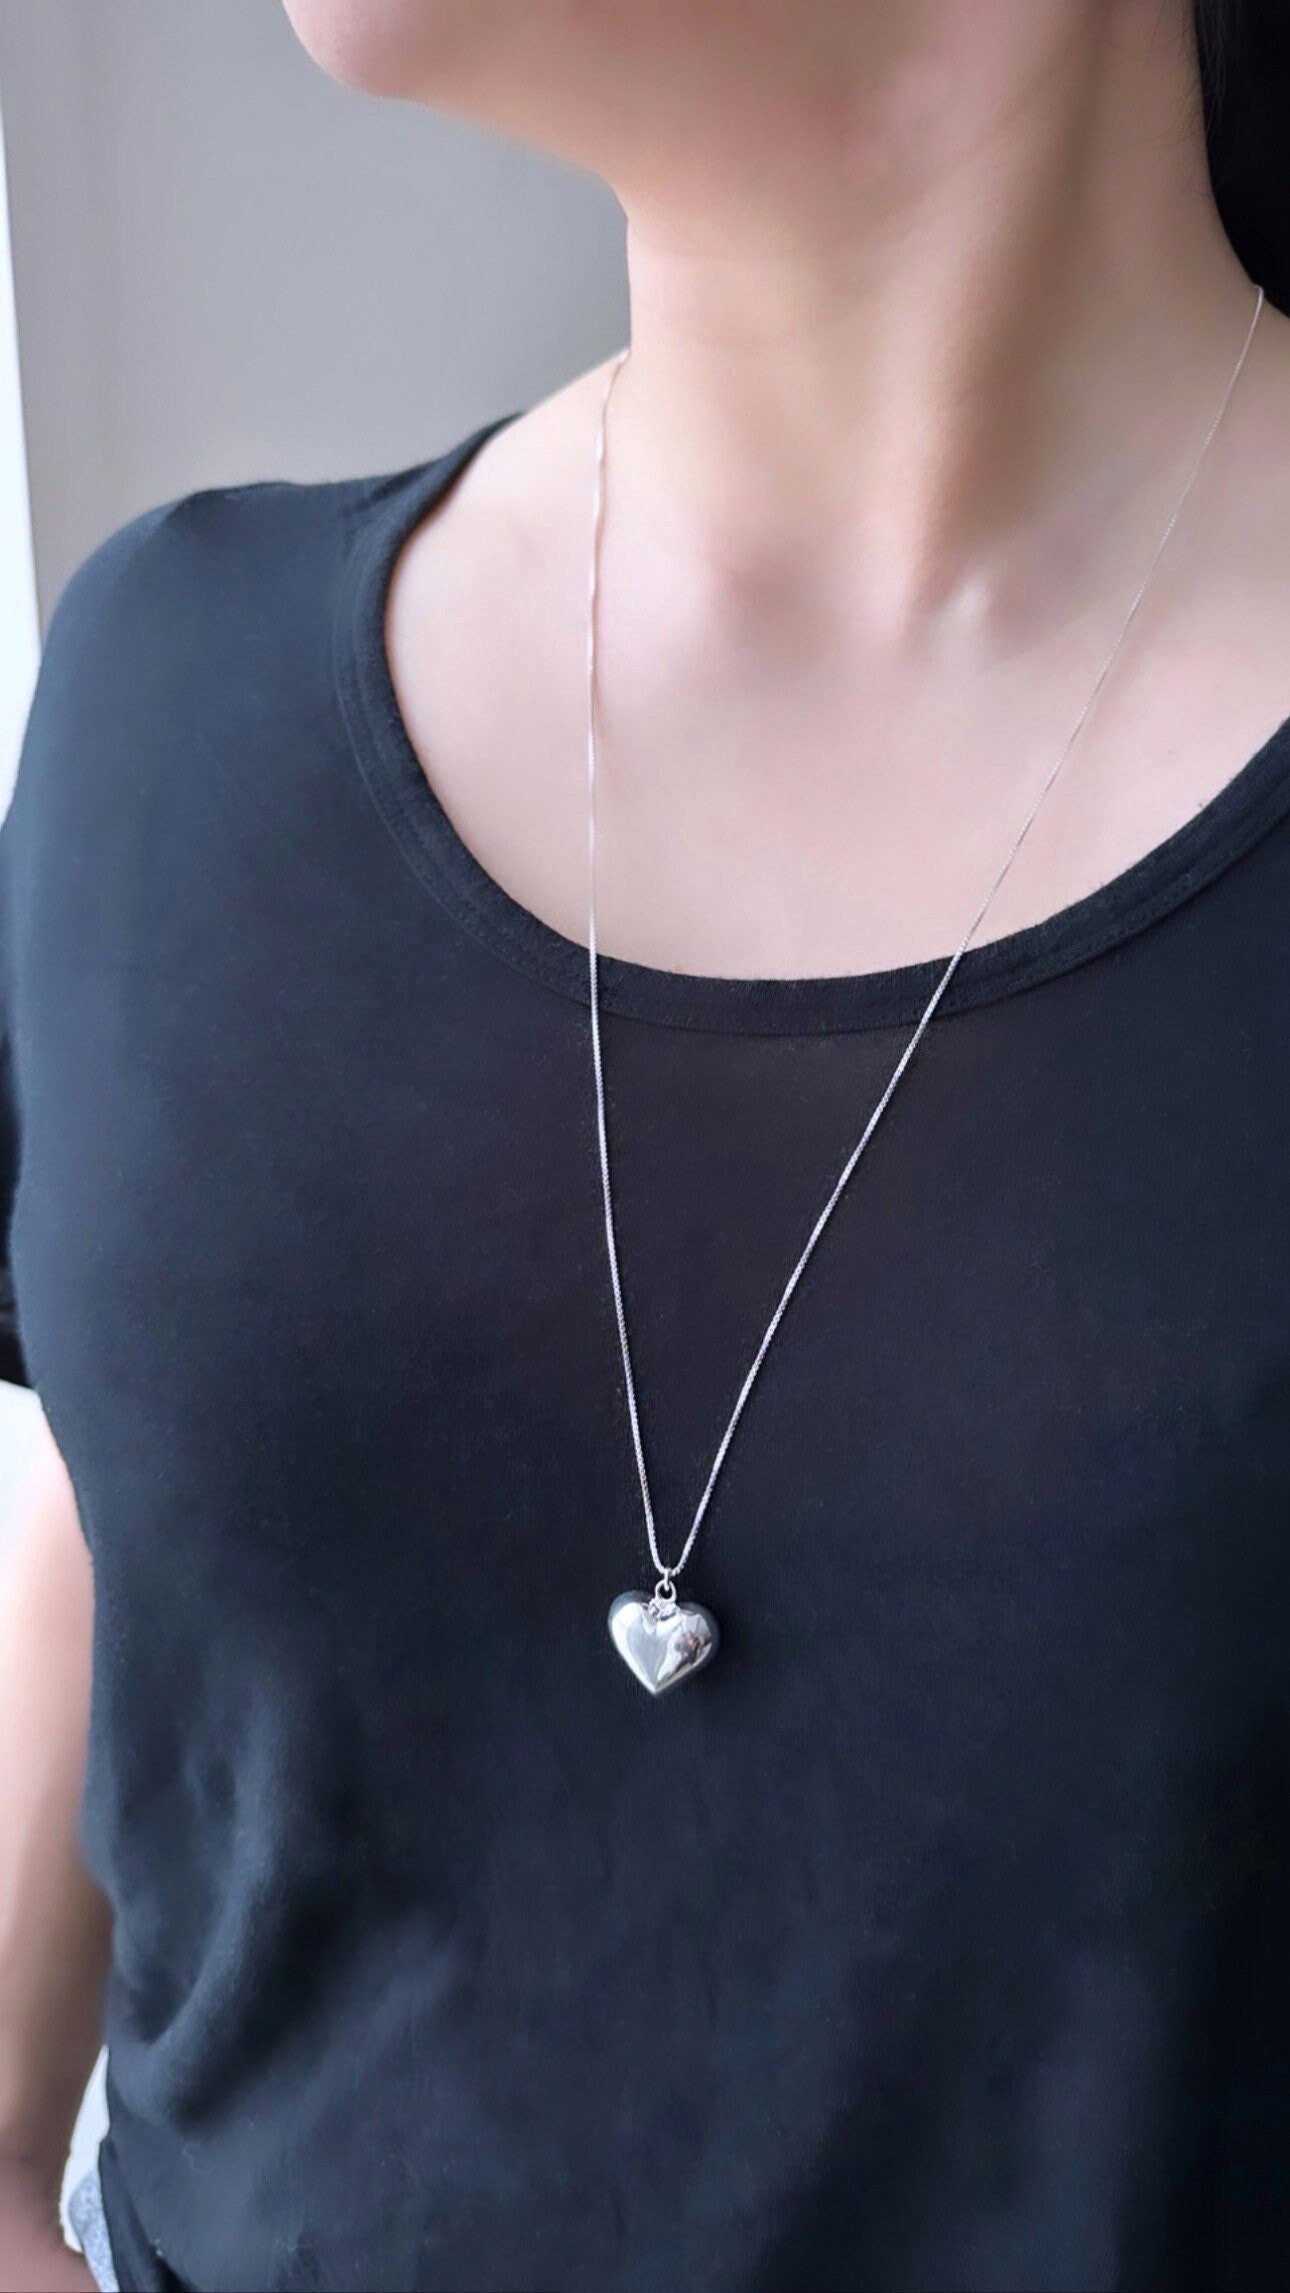 My big puffy heart necklace (sterling silver, long necklace)